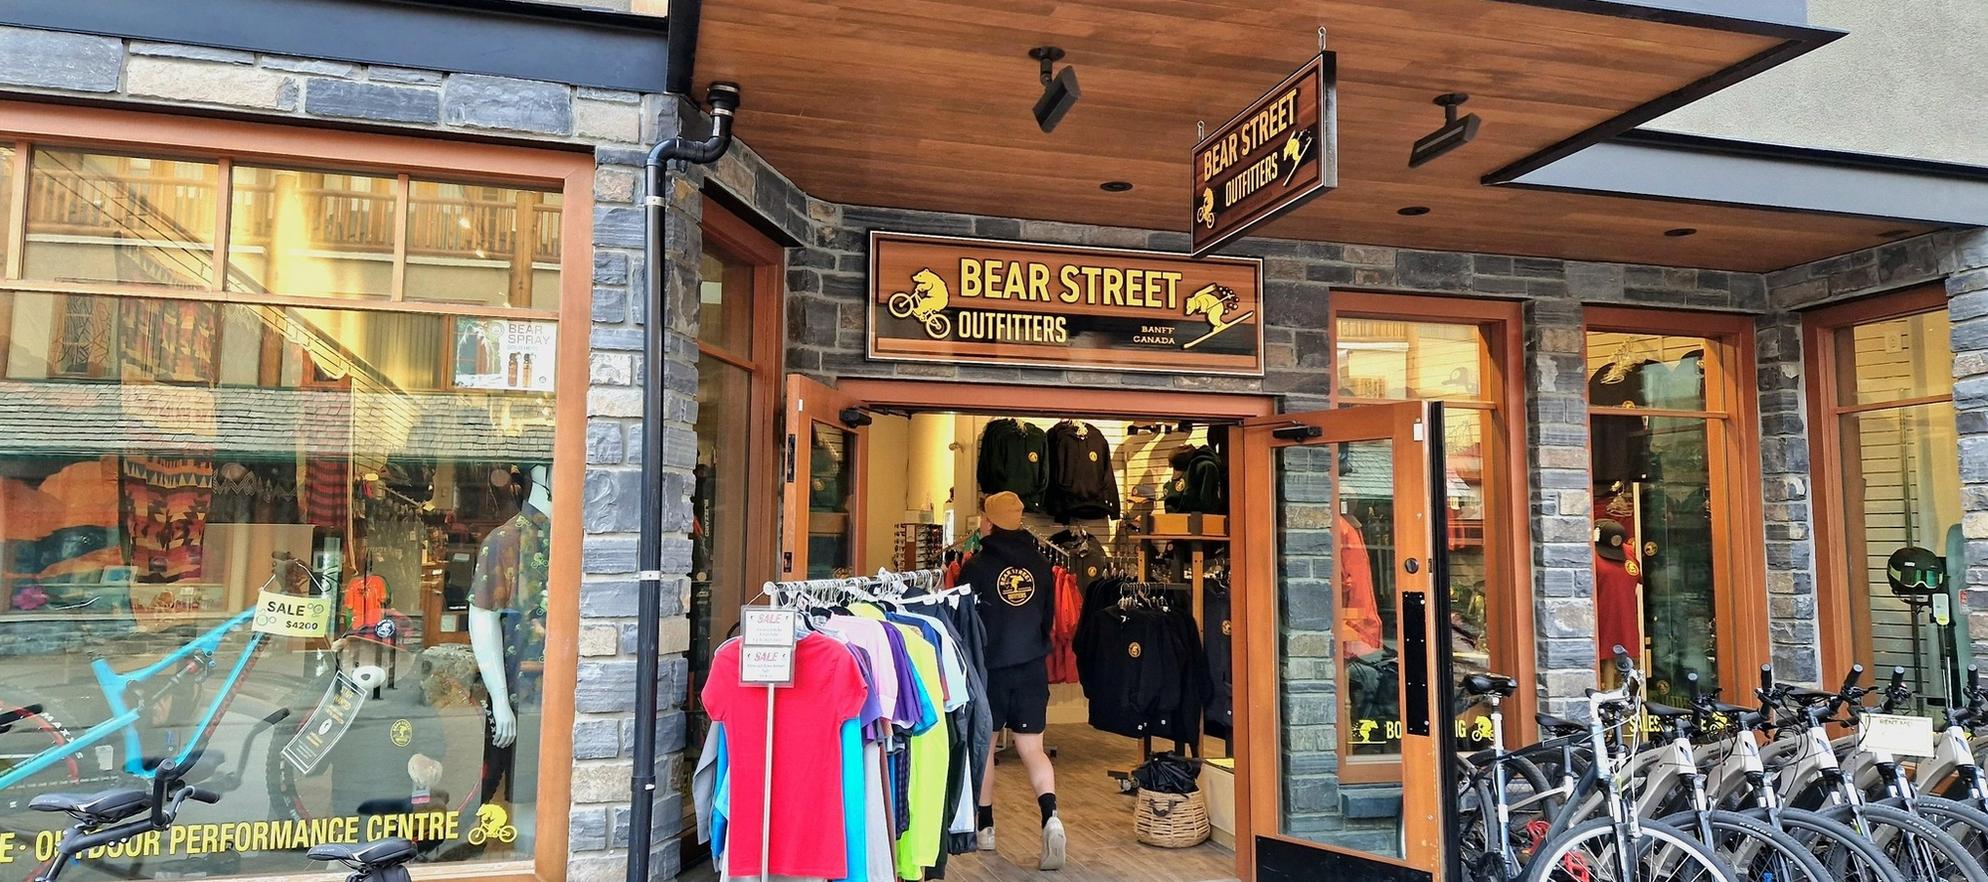  Bear Street Outfitters